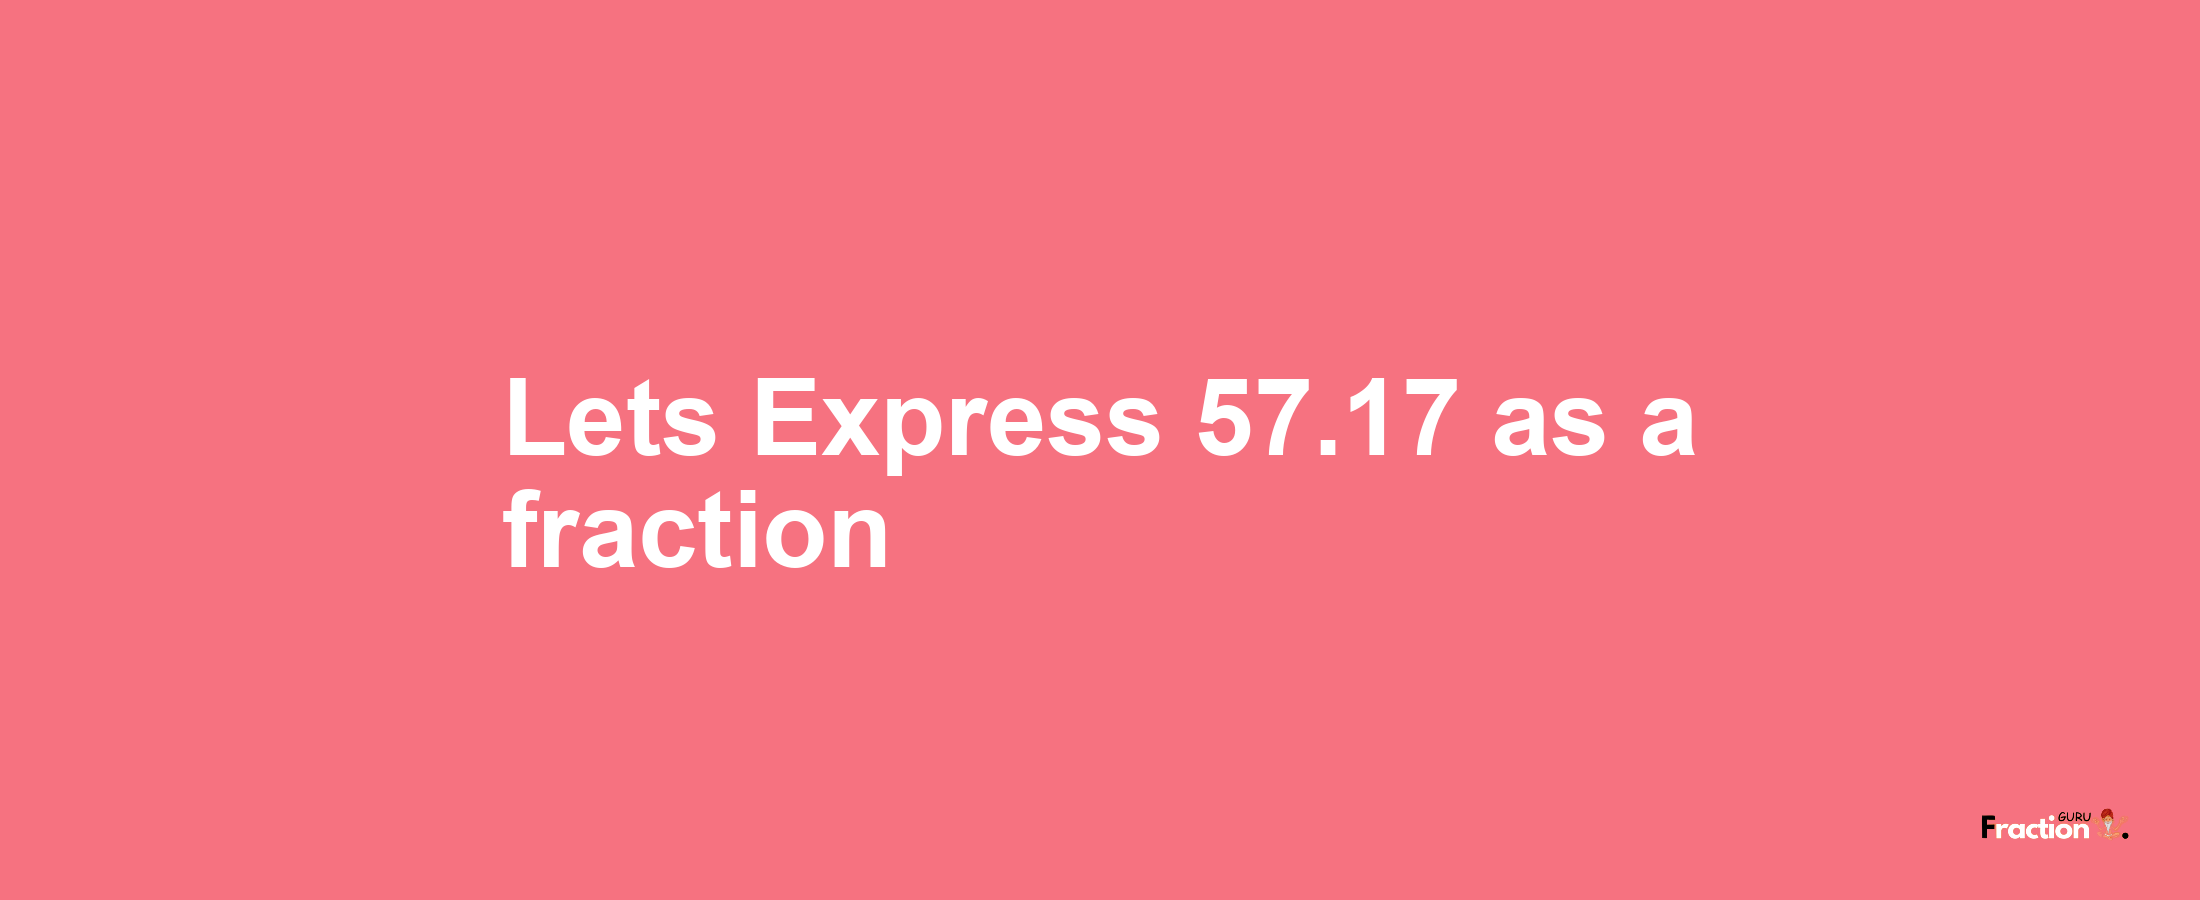 Lets Express 57.17 as afraction